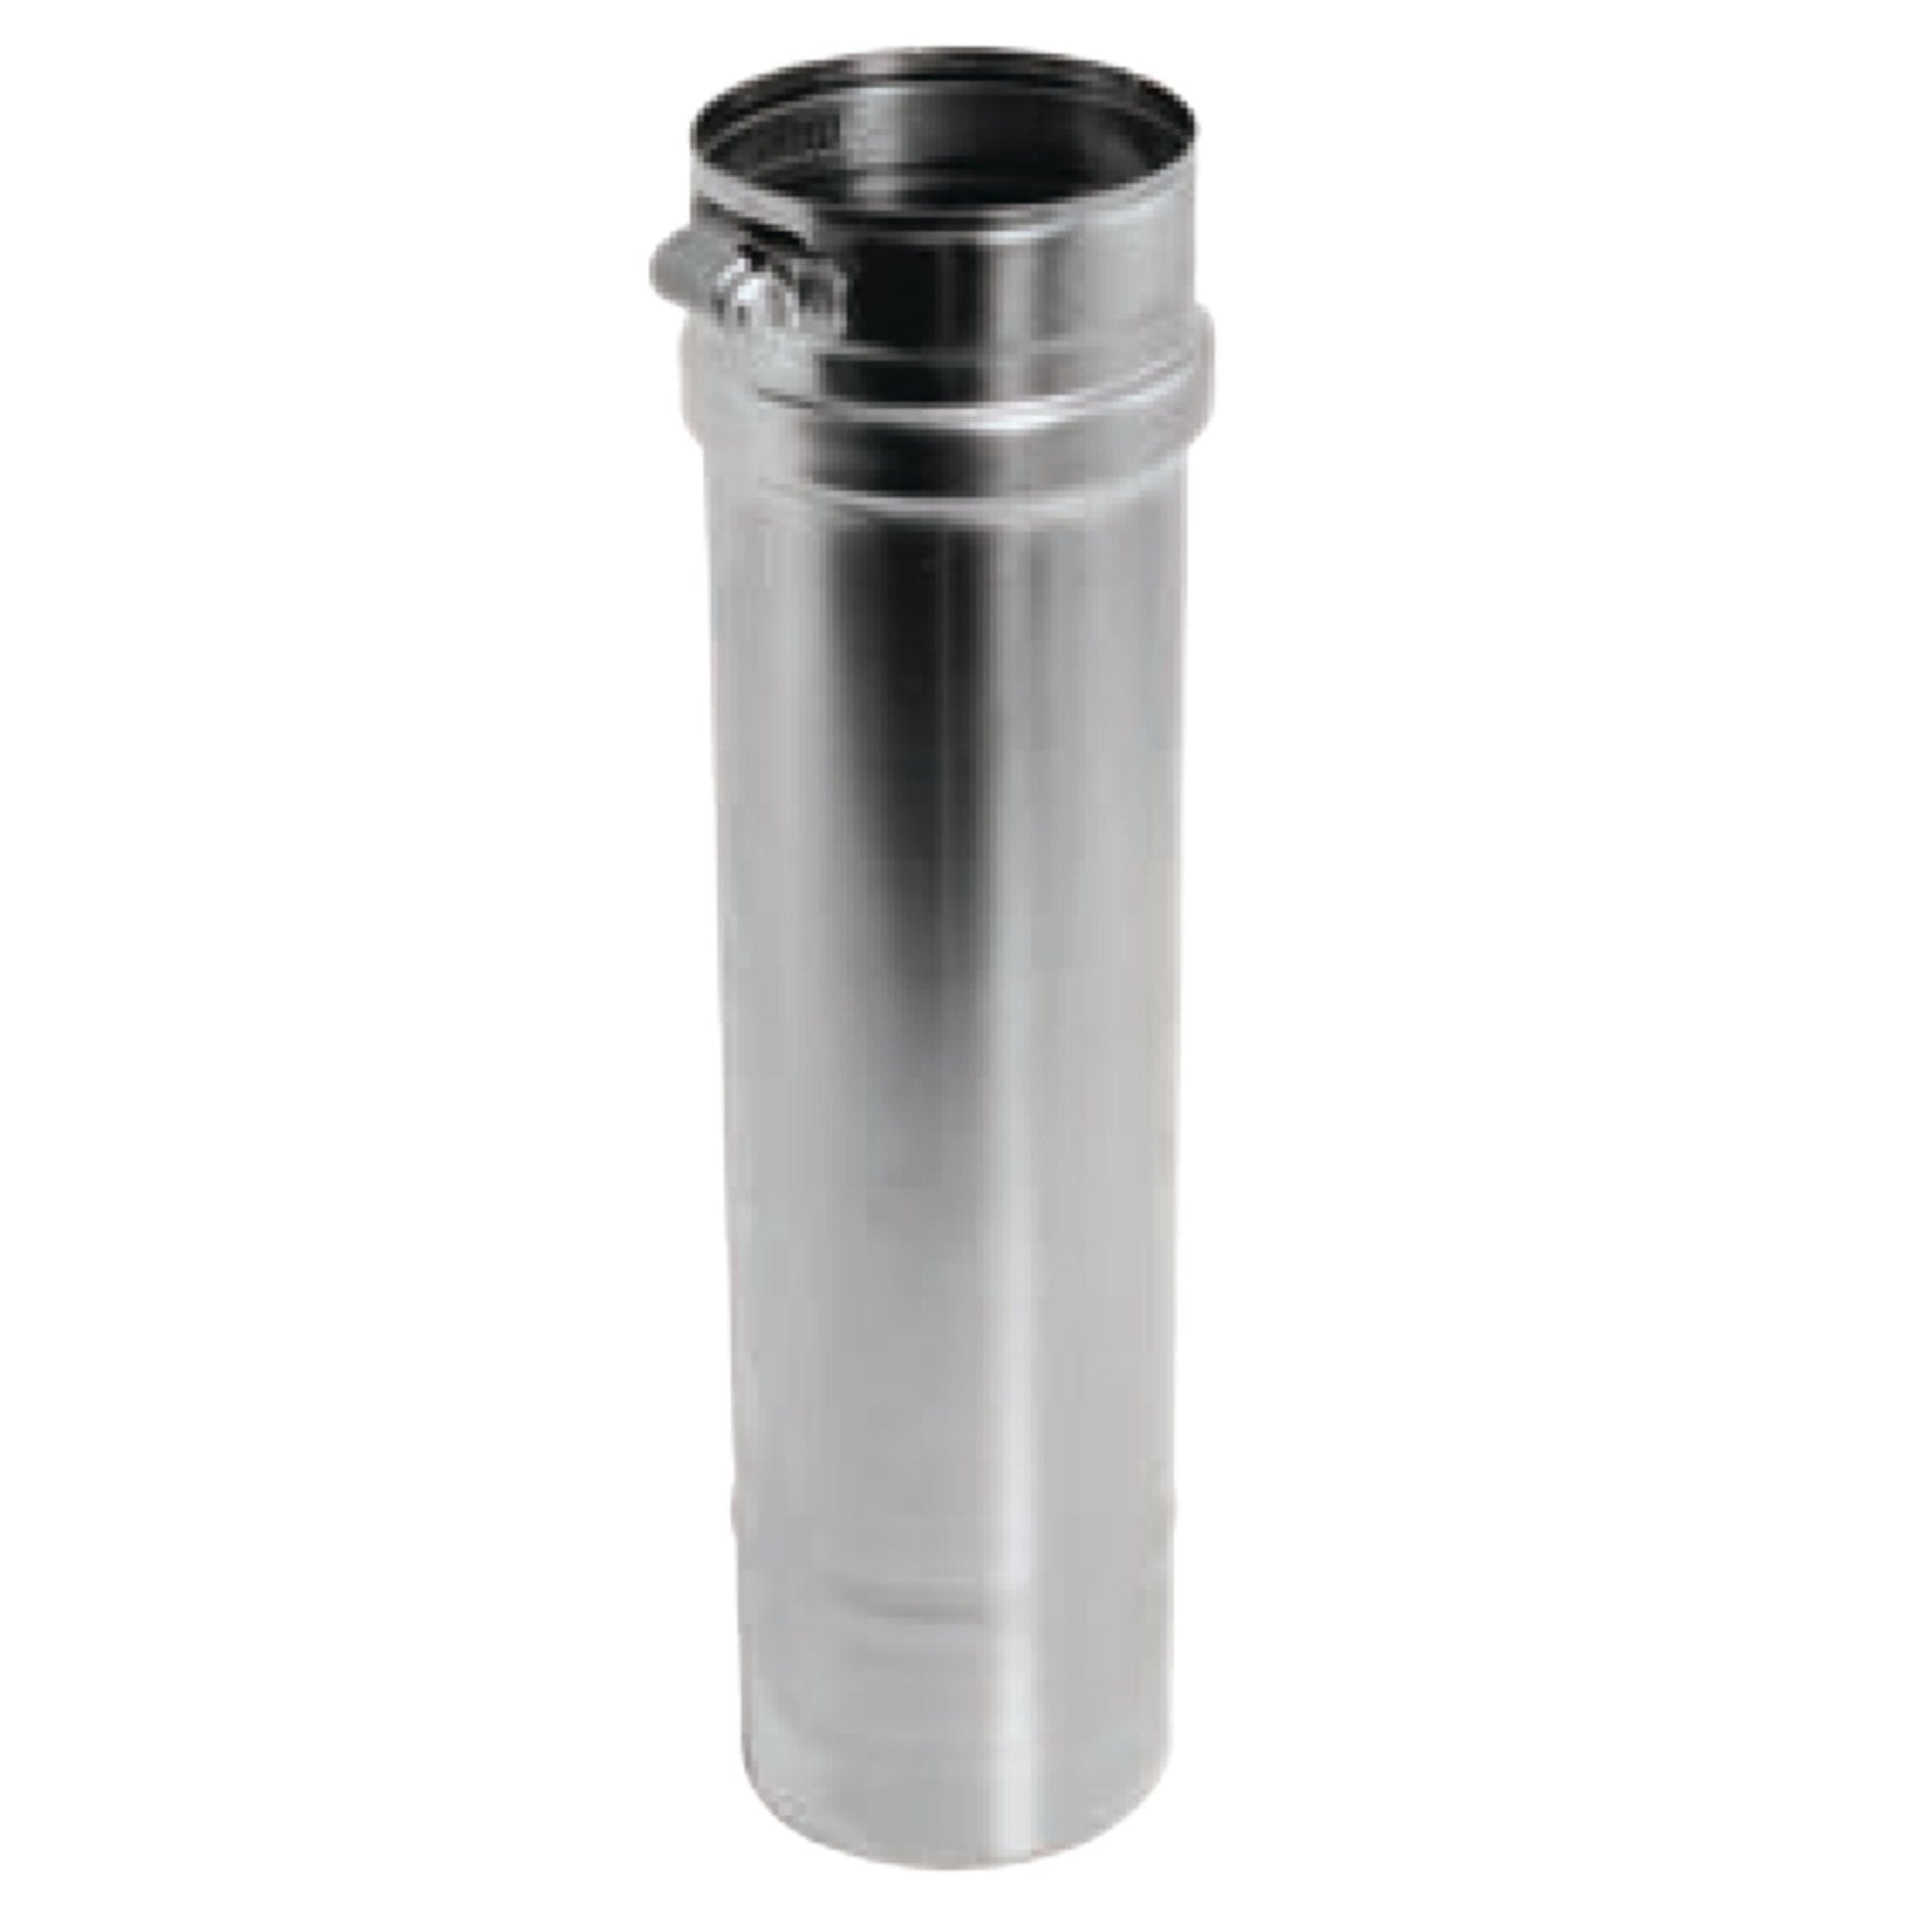 DuraVent FasNSeal 5" x 6" 29-4C Stainless Steel Vent Length